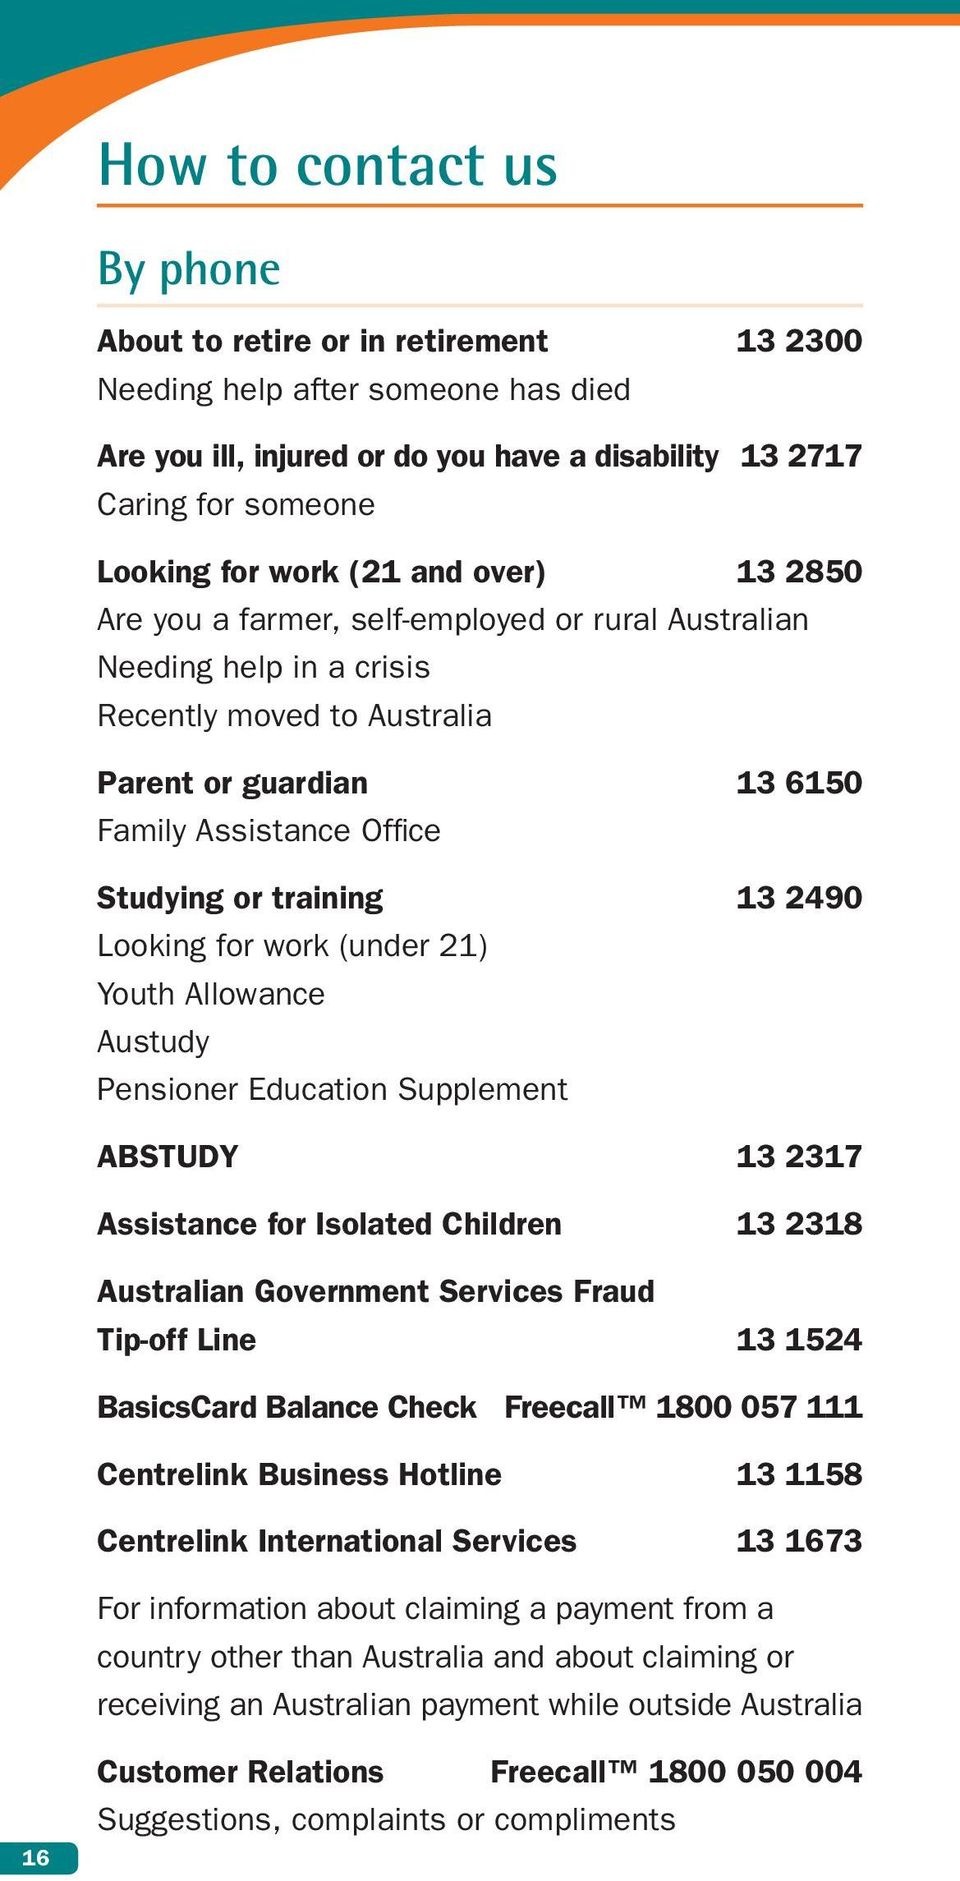 training 13 2490 Looking for work (under 21) Youth Allowance Austudy Pensioner Education Supplement ABSTUDY 13 2317 Assistance for Isolated Children 13 2318 Australian Government Services Fraud